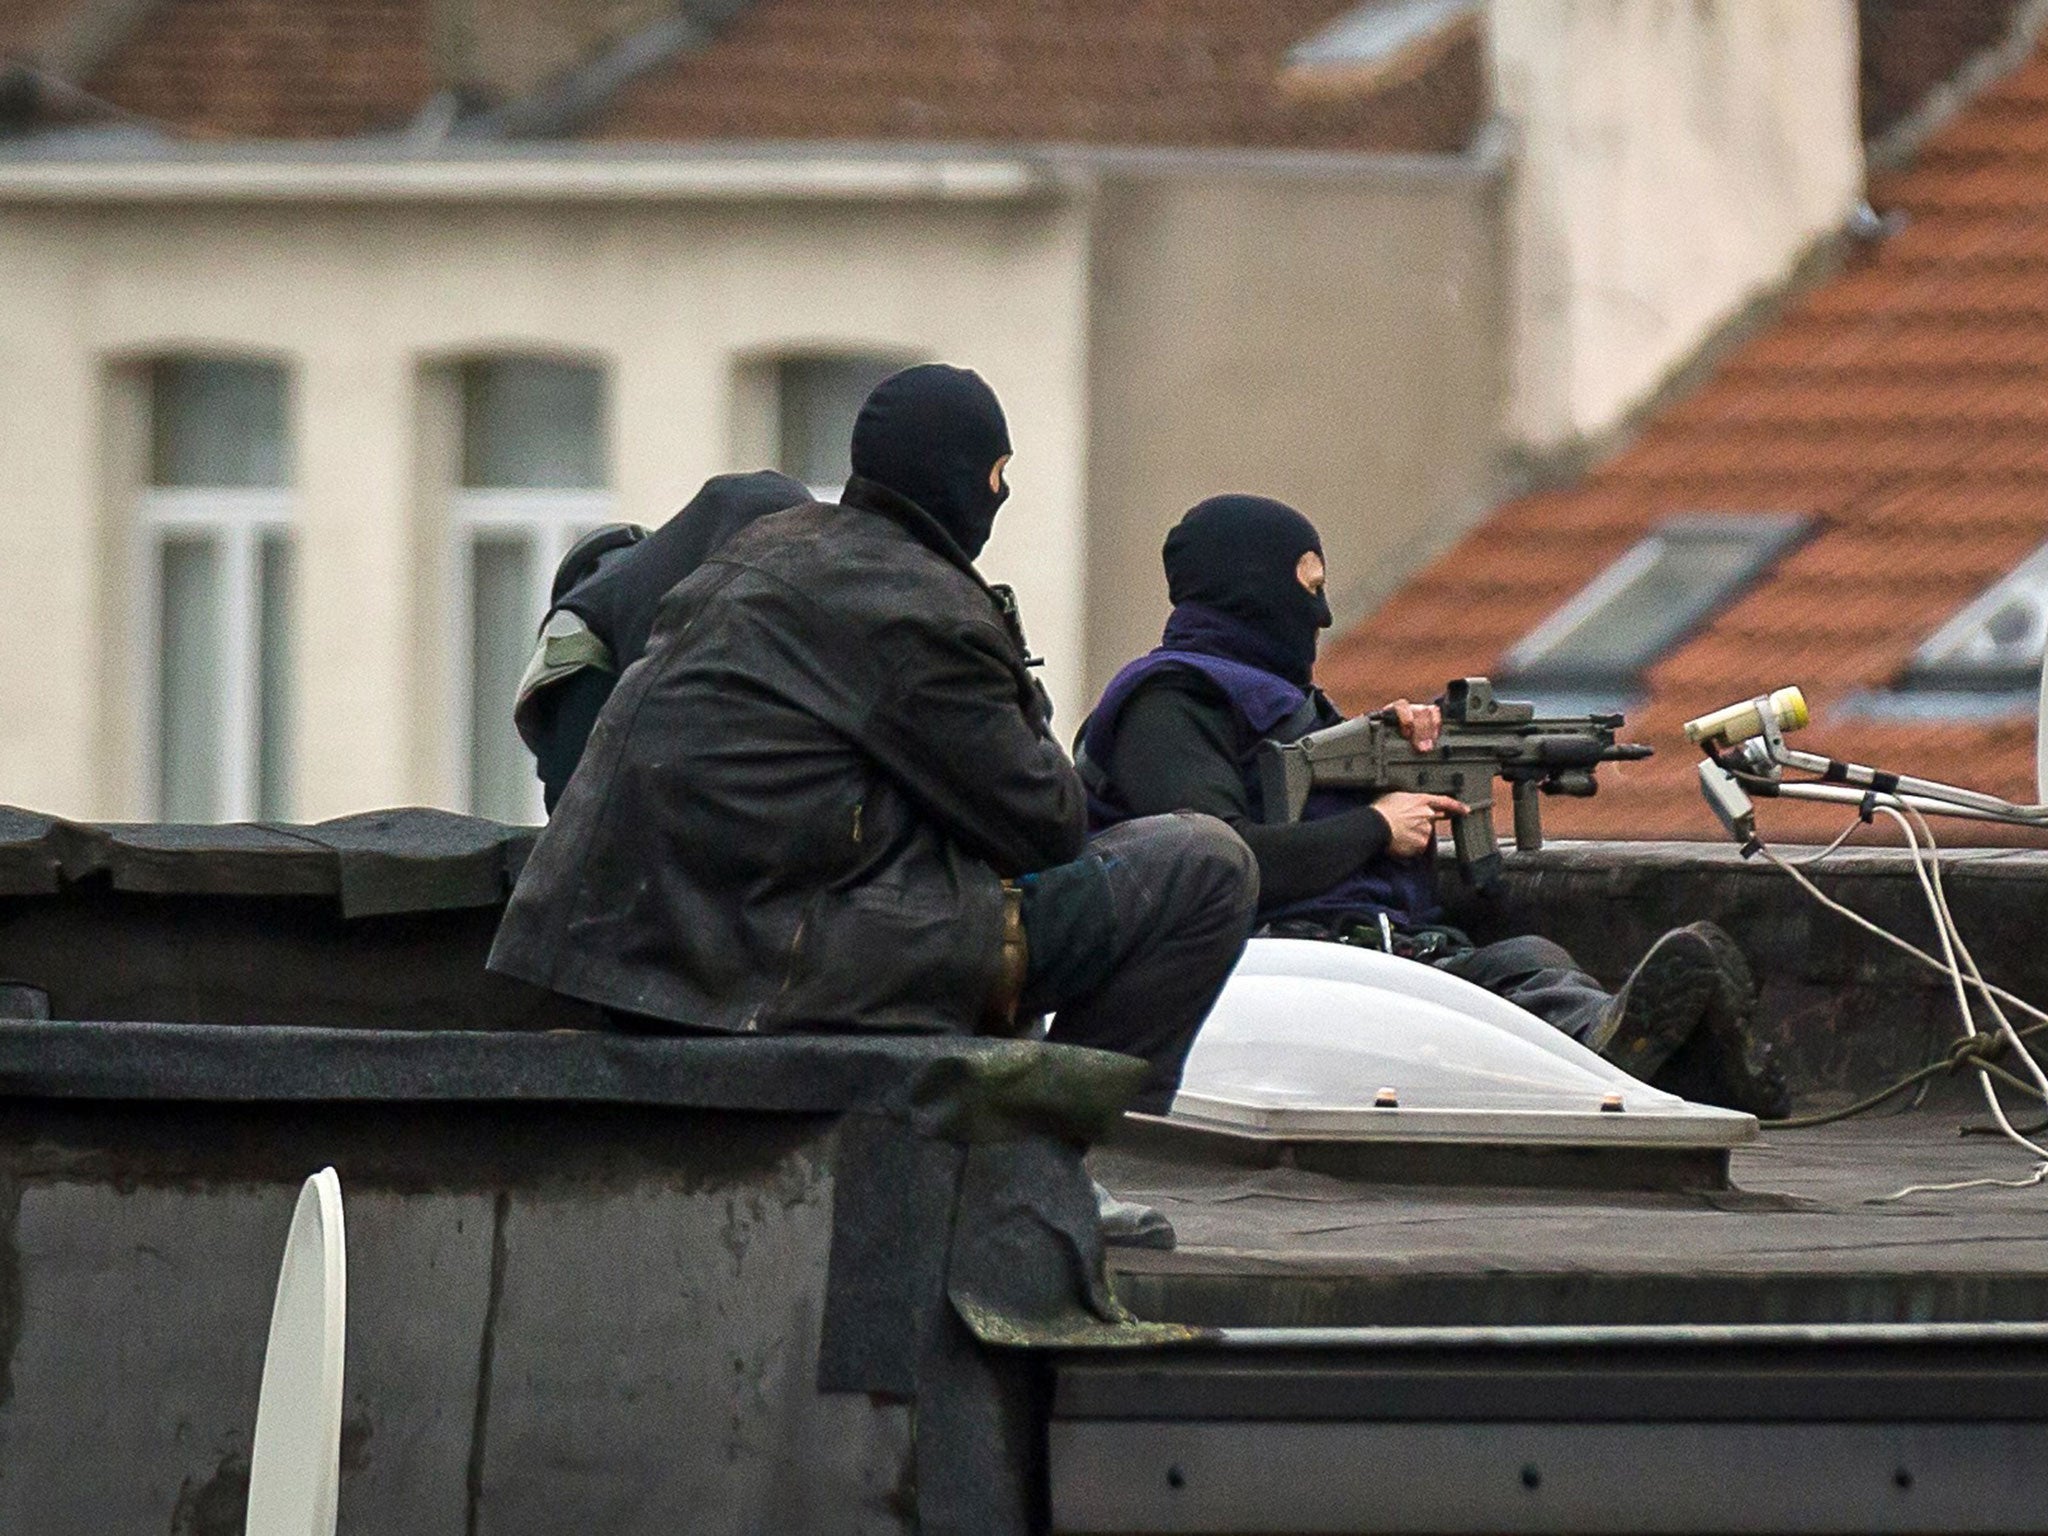 Special force officers stand guard on a roof in Rue Delaunoy, in the district of Molenbeek-Saint-Jean in Brussels on November 16, 2015.